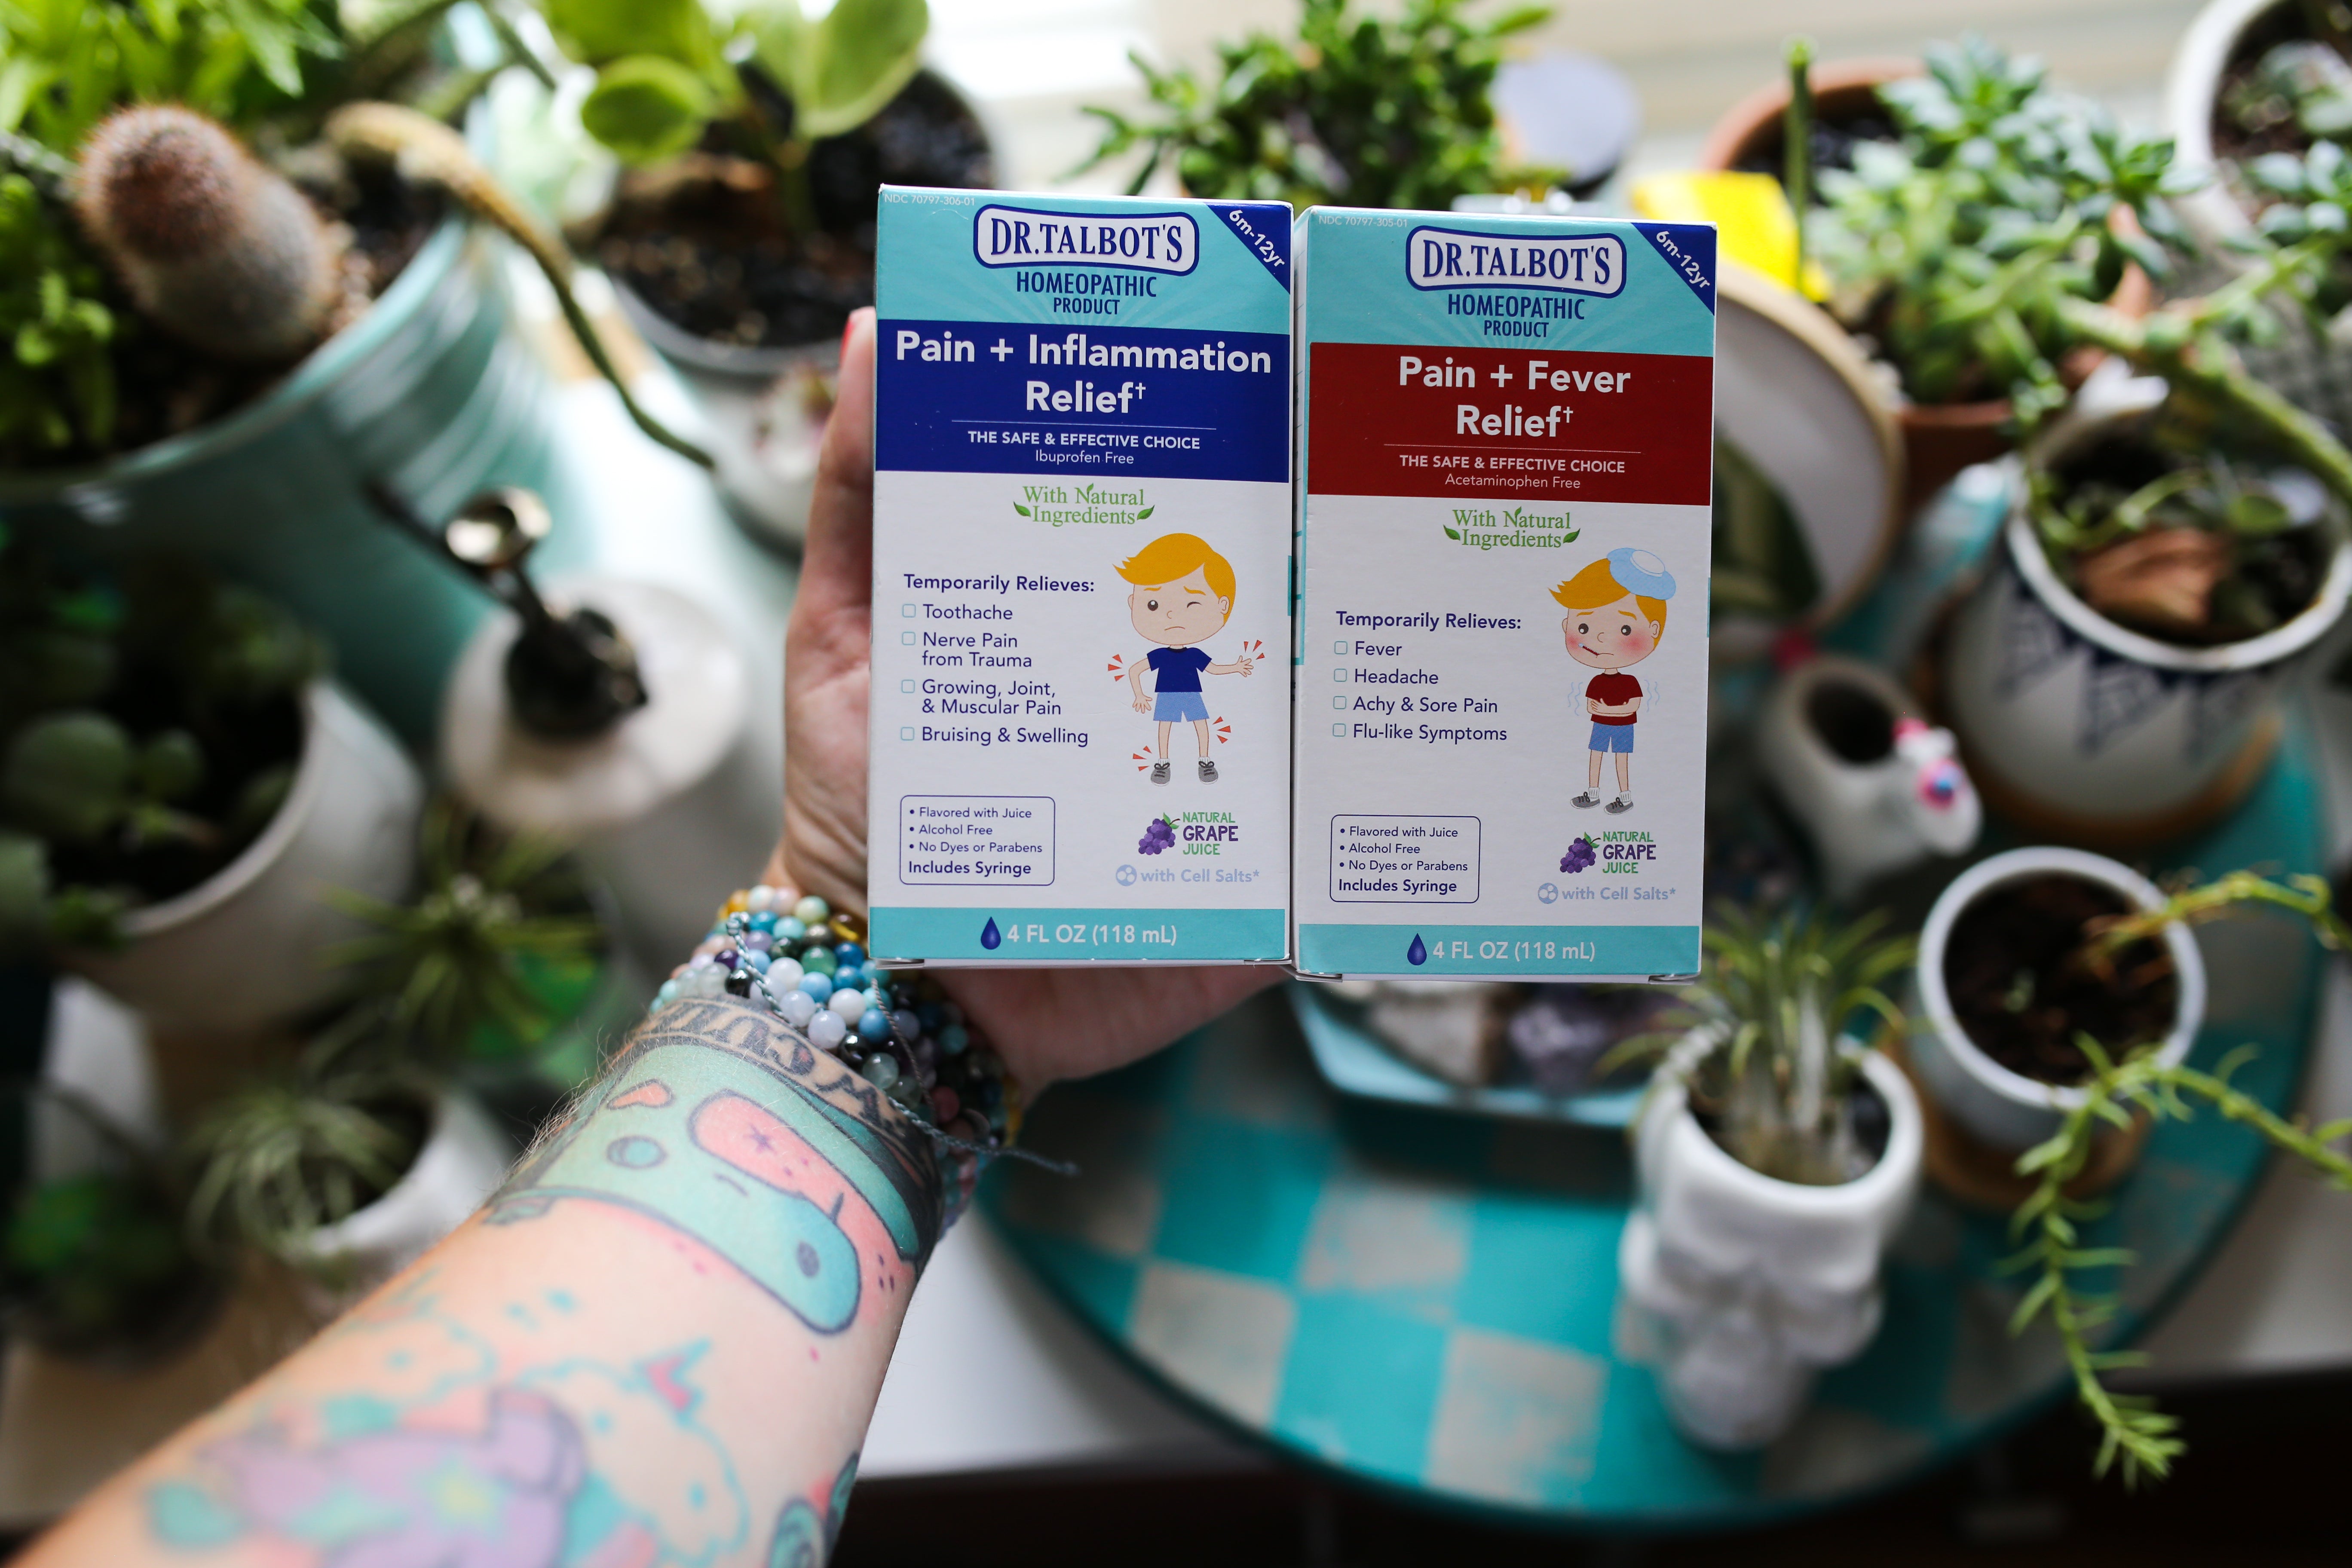 Homeopathic Pain Relief & Fever Reducers from Nuby + Dr. Talbots